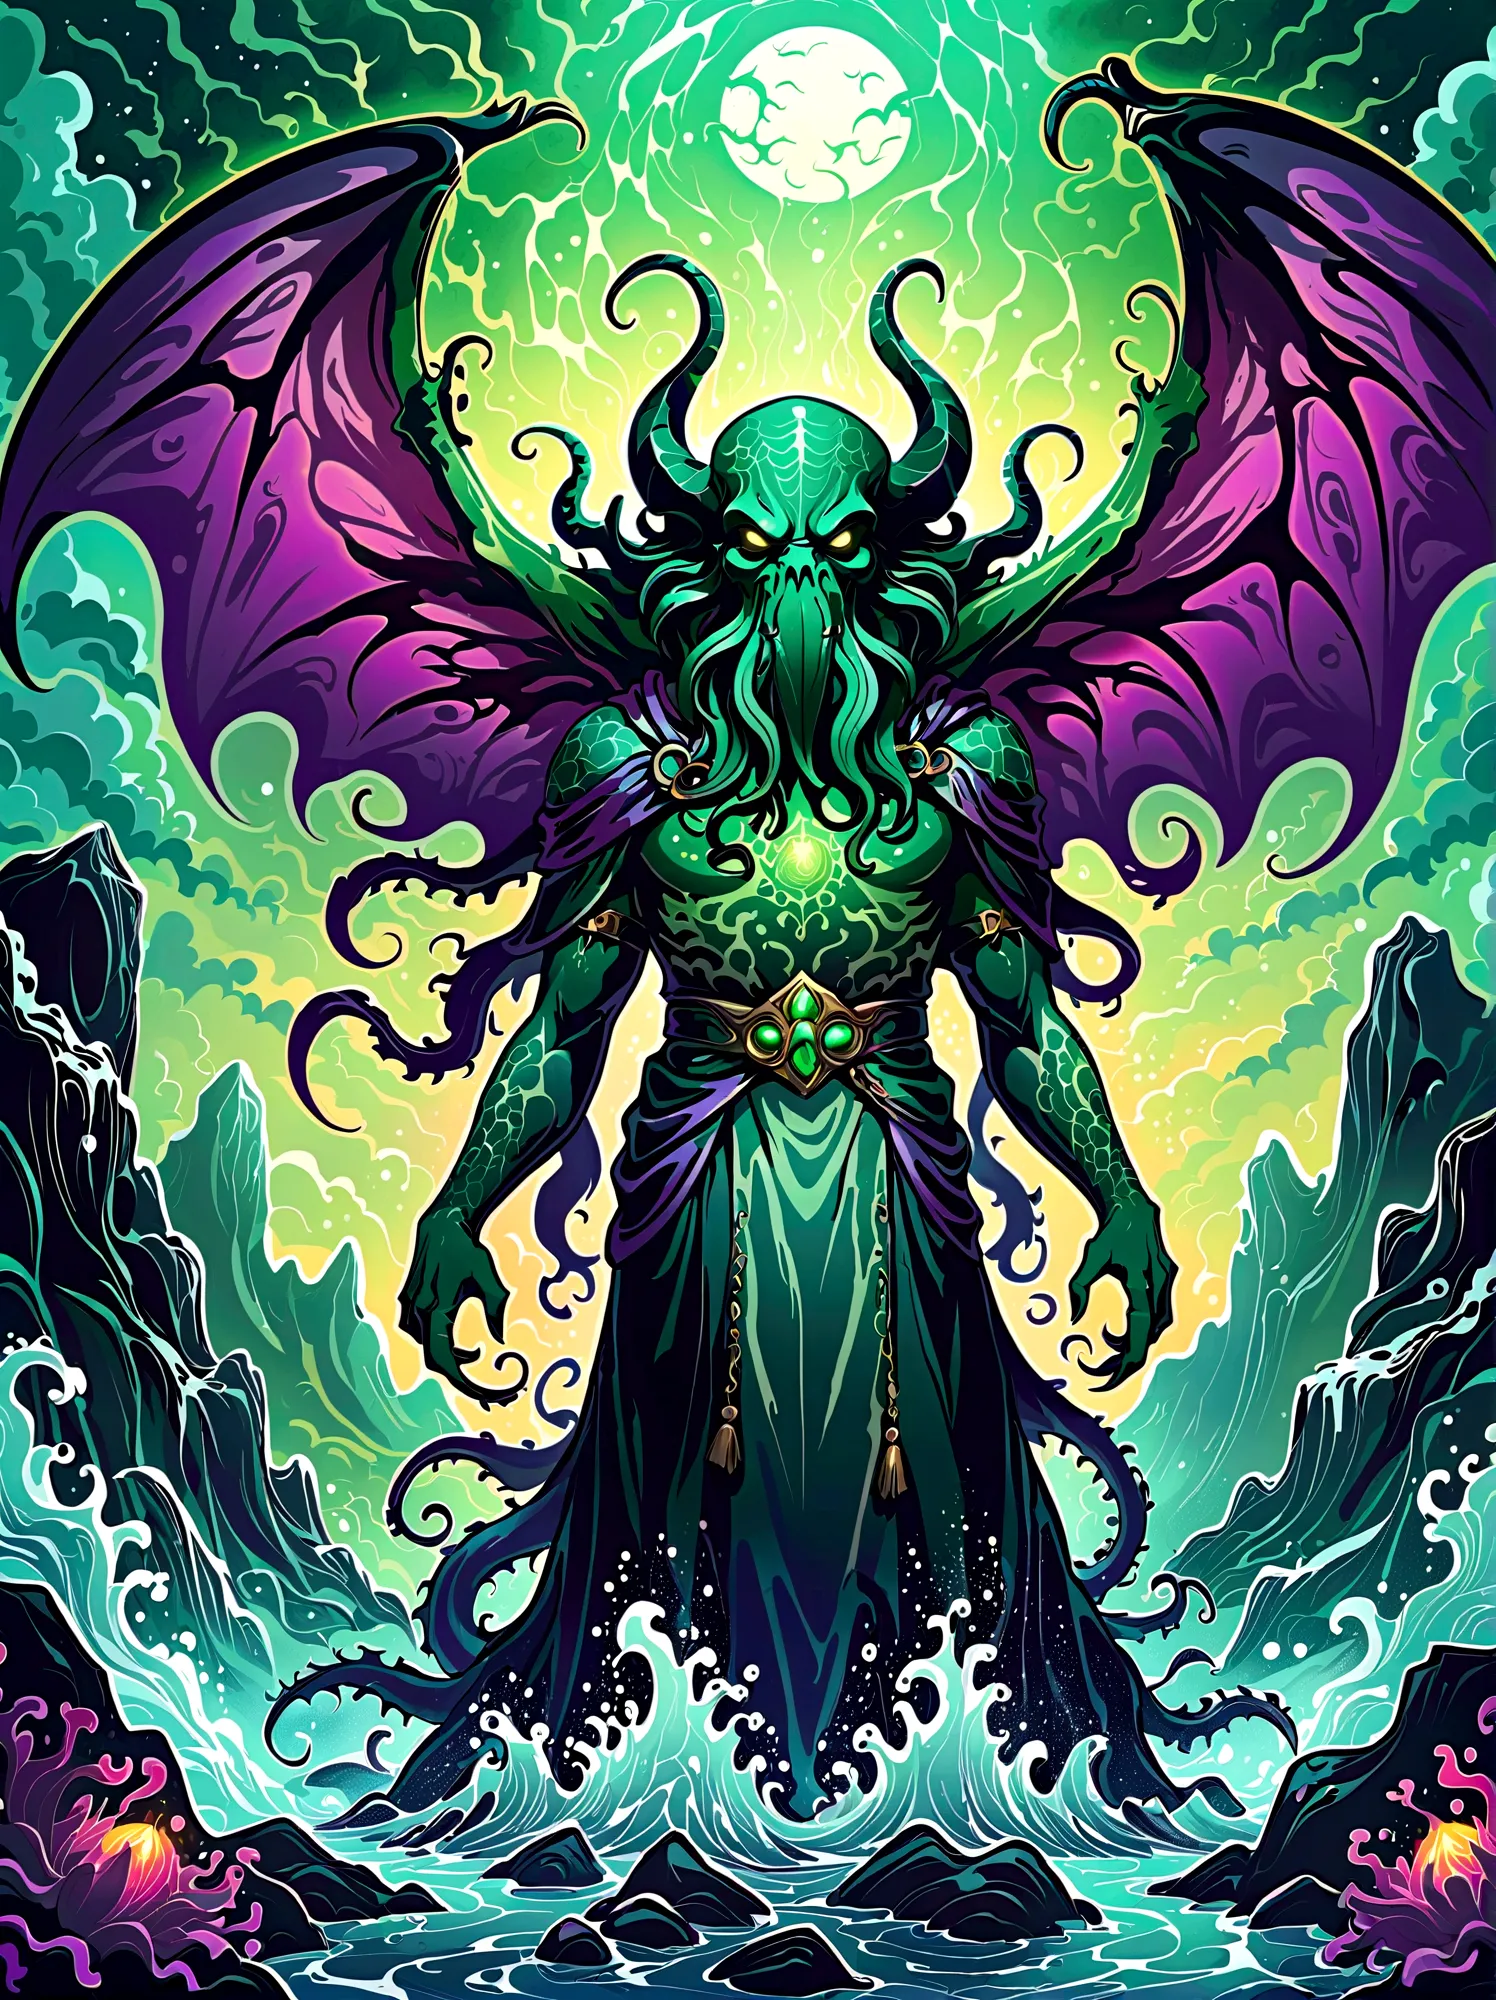 Create an image illustrating a fearsome interpretation of the ancient deity Cthulhu, as envisioned in Lovecraftian horror litera...